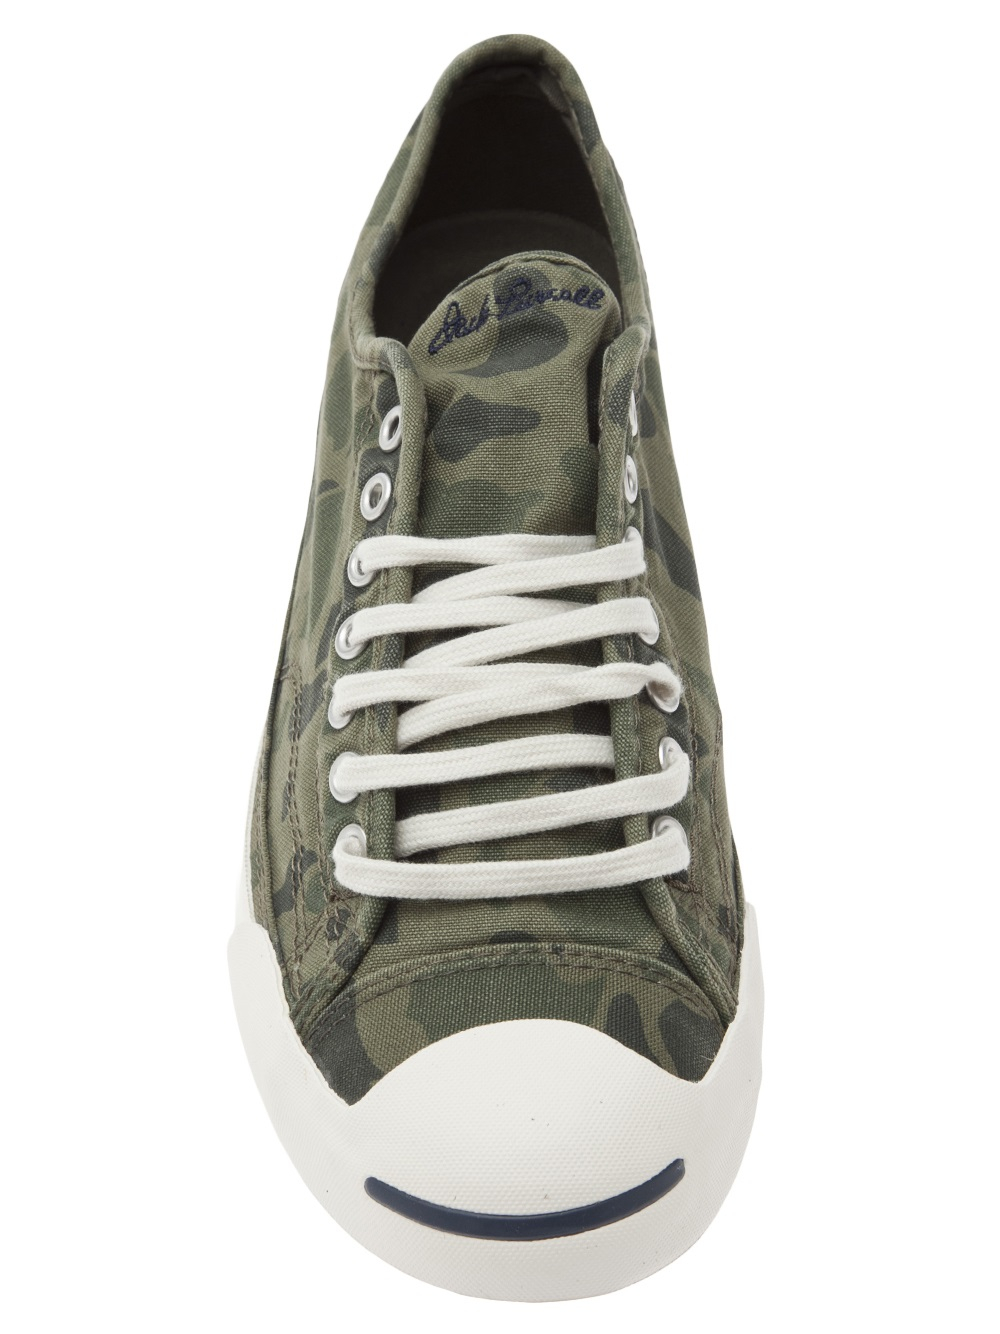 Lyst - Converse Jack Purcell Sneaker in Green for Men